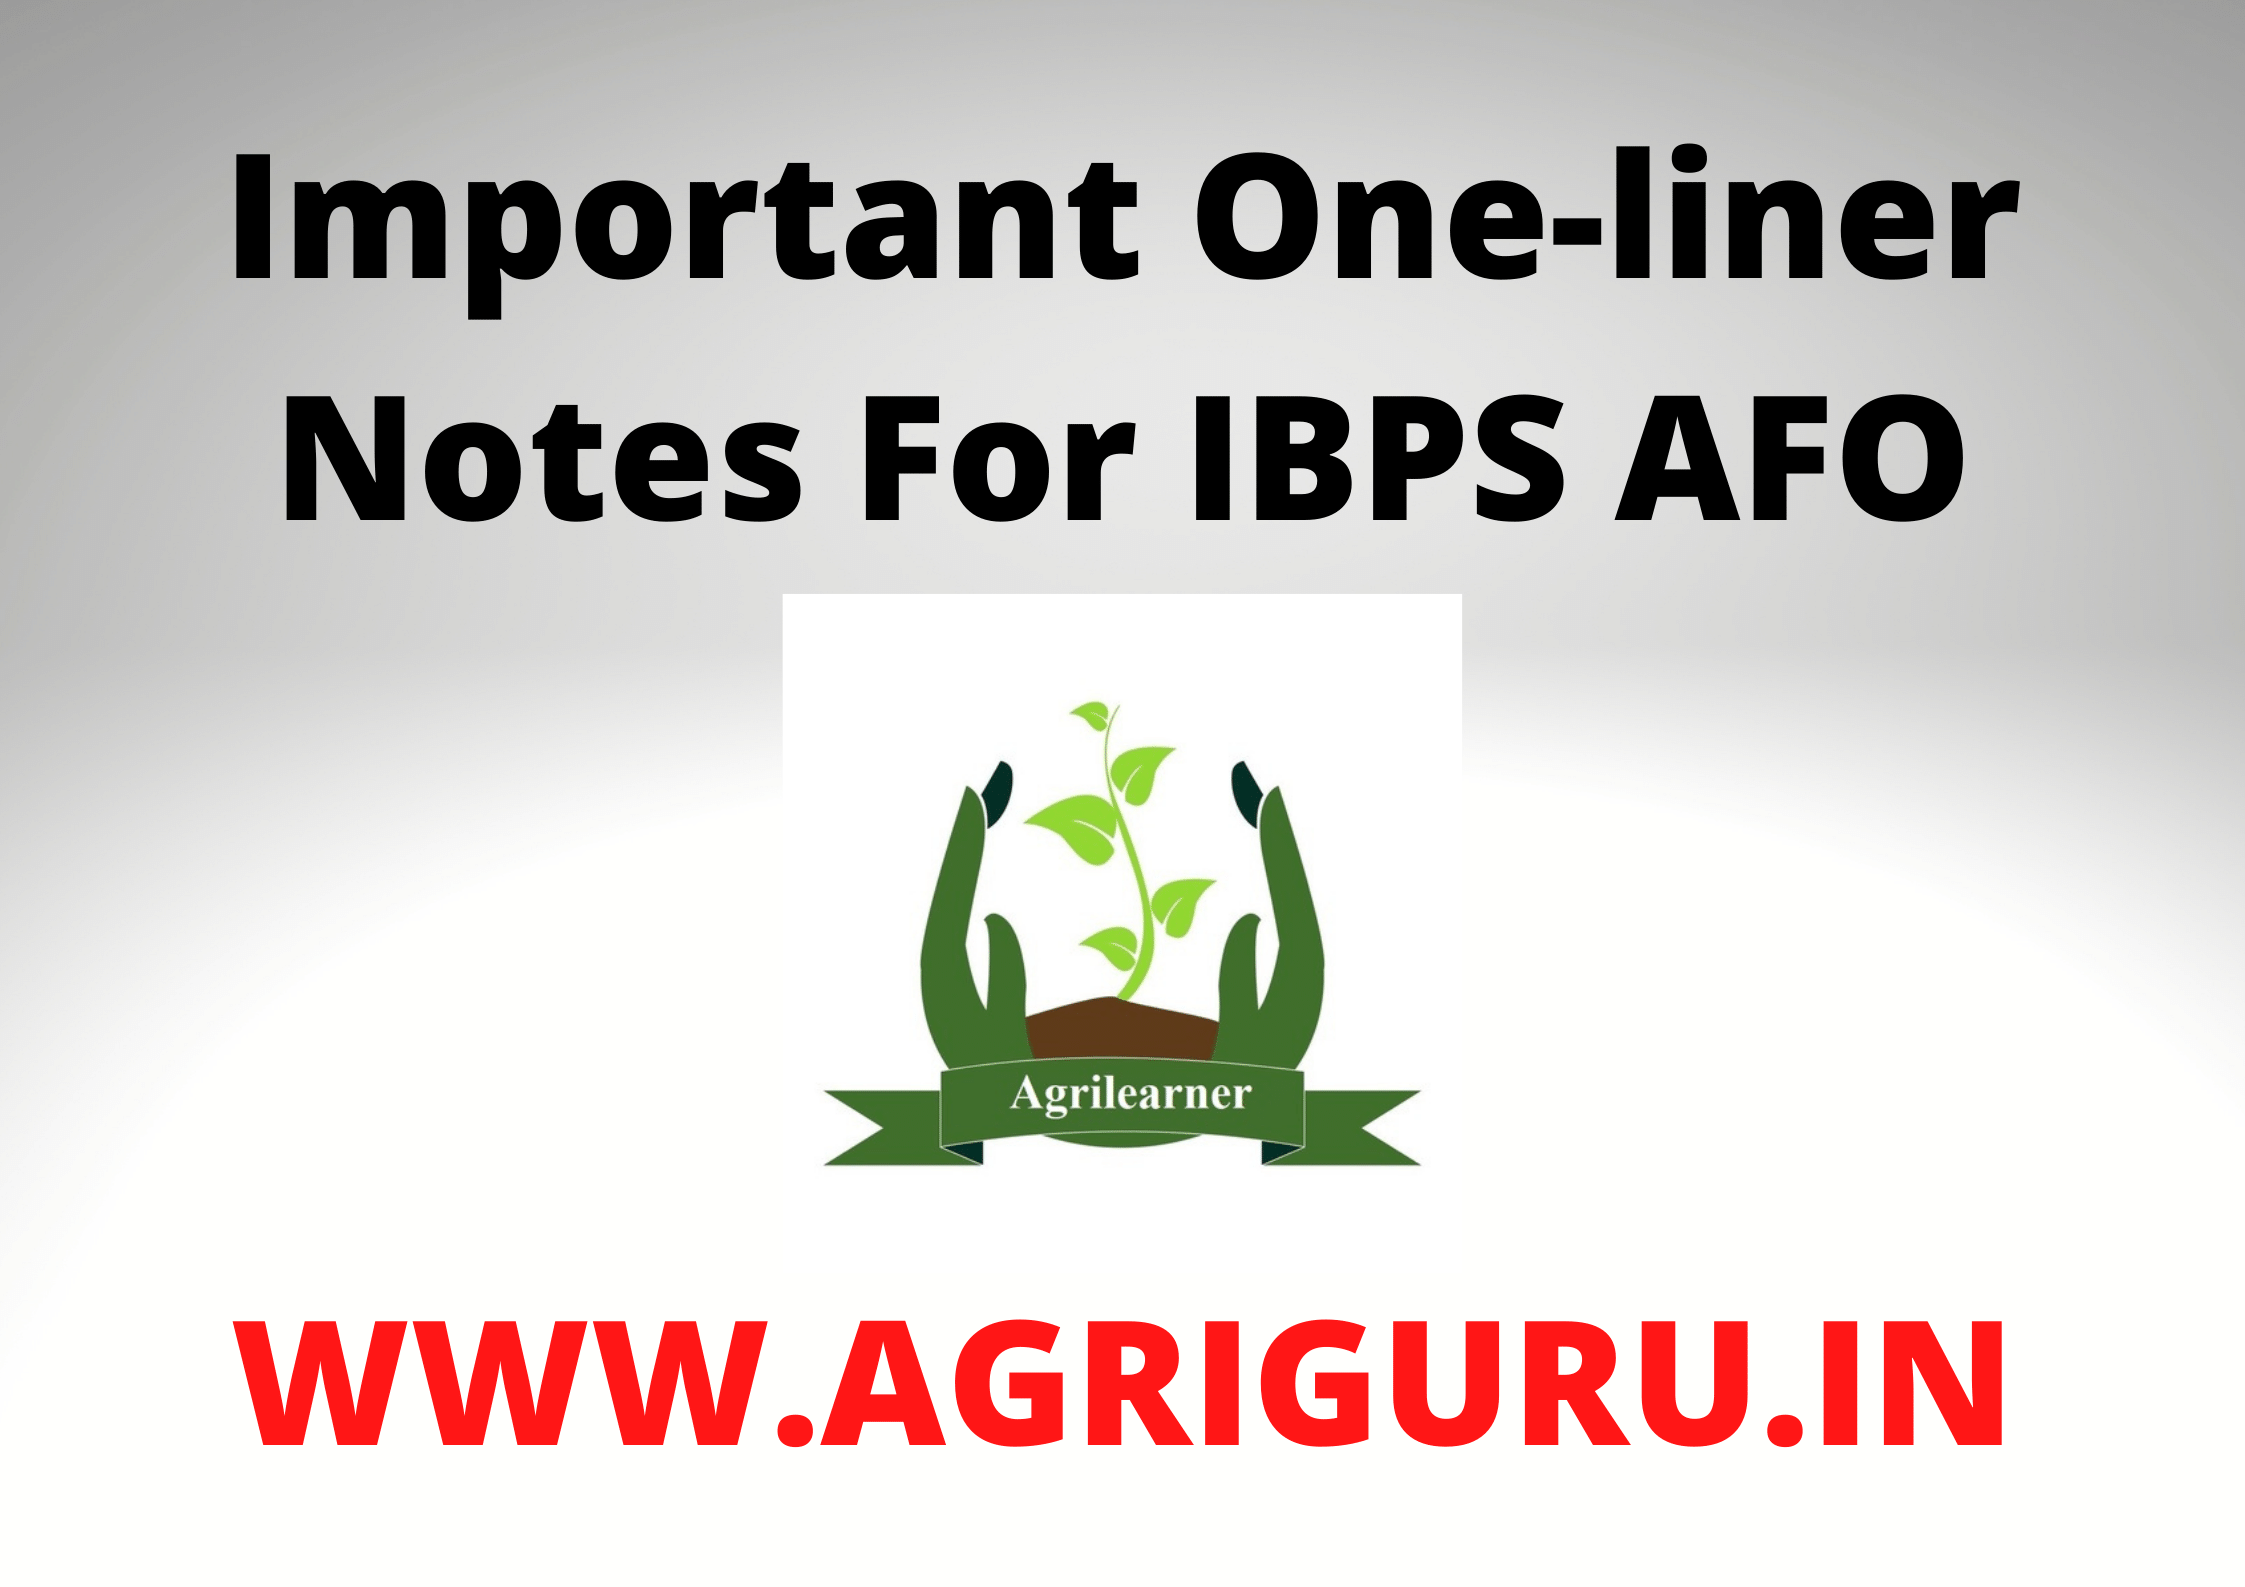 Important One-liner Notes For IBPS AFO